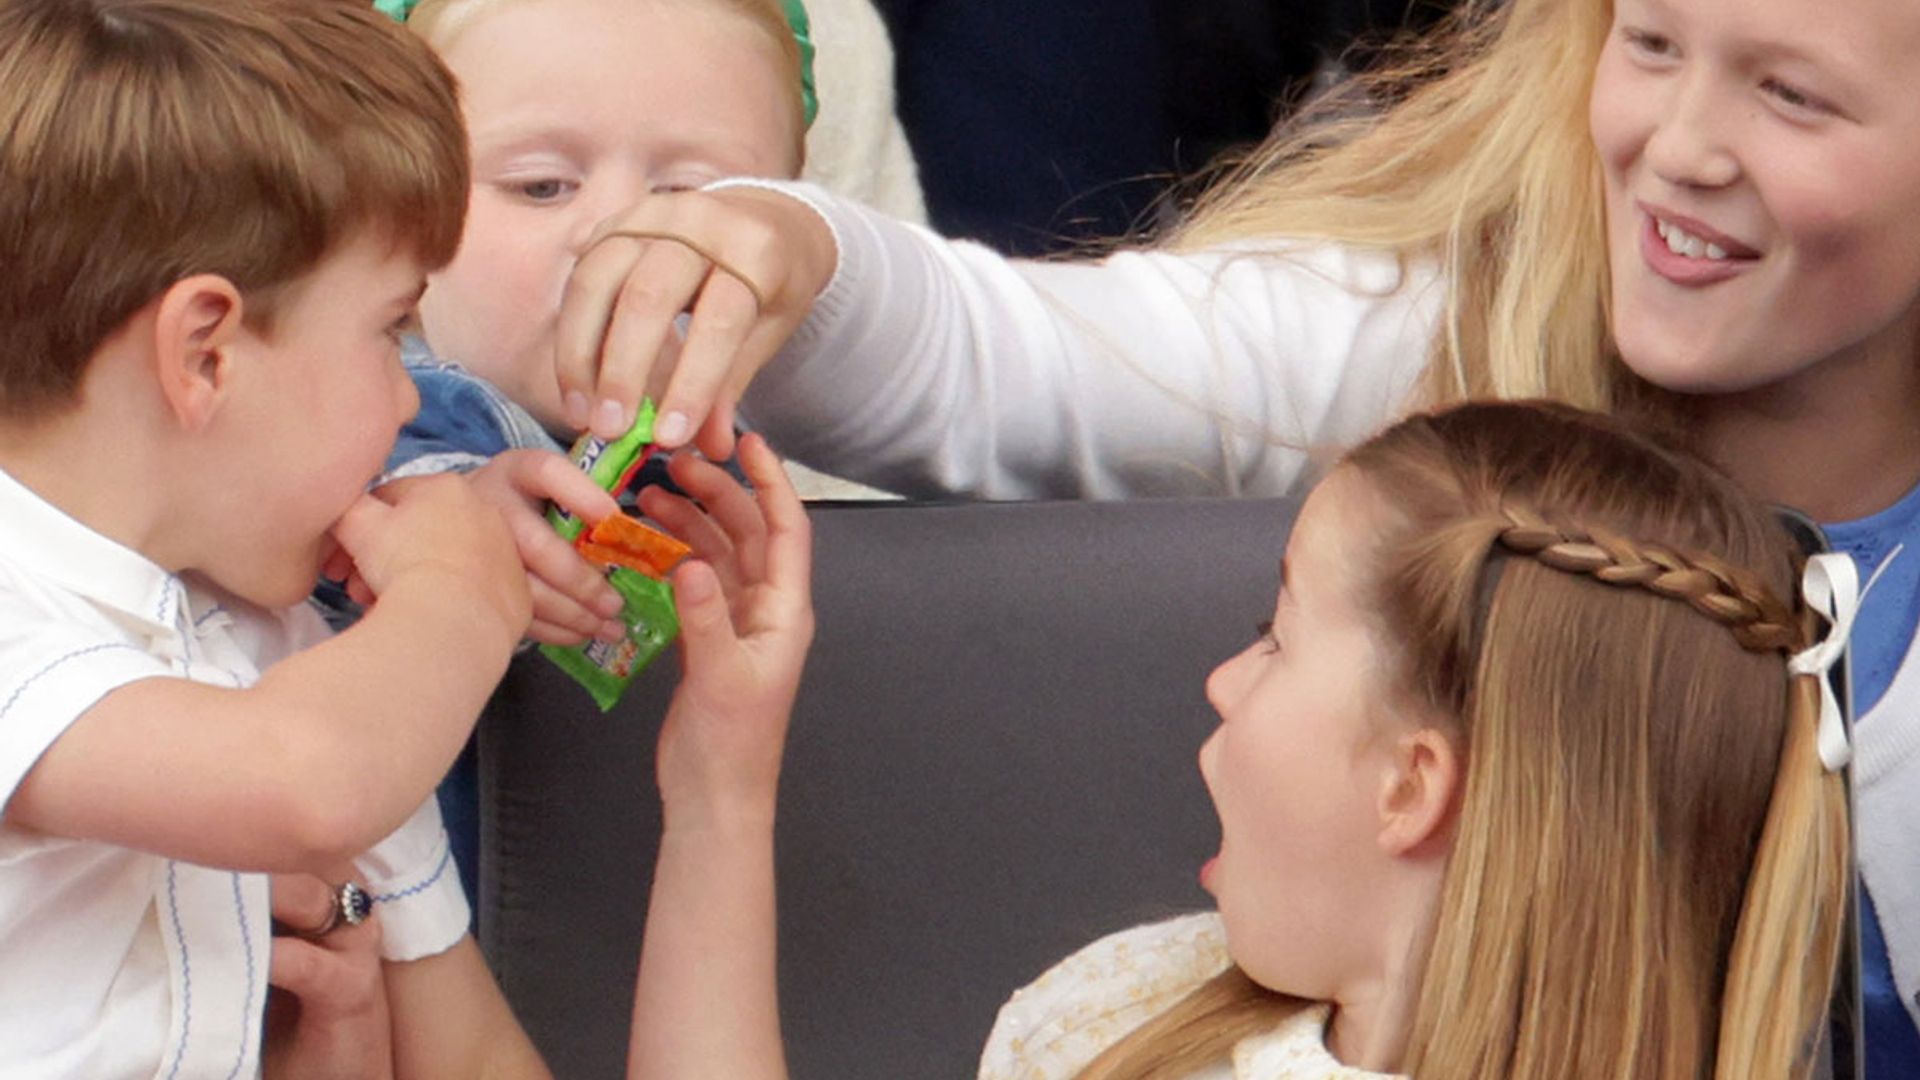 Lena Tindall shares her Maoam sweets and Princess Charlotte can't get enough